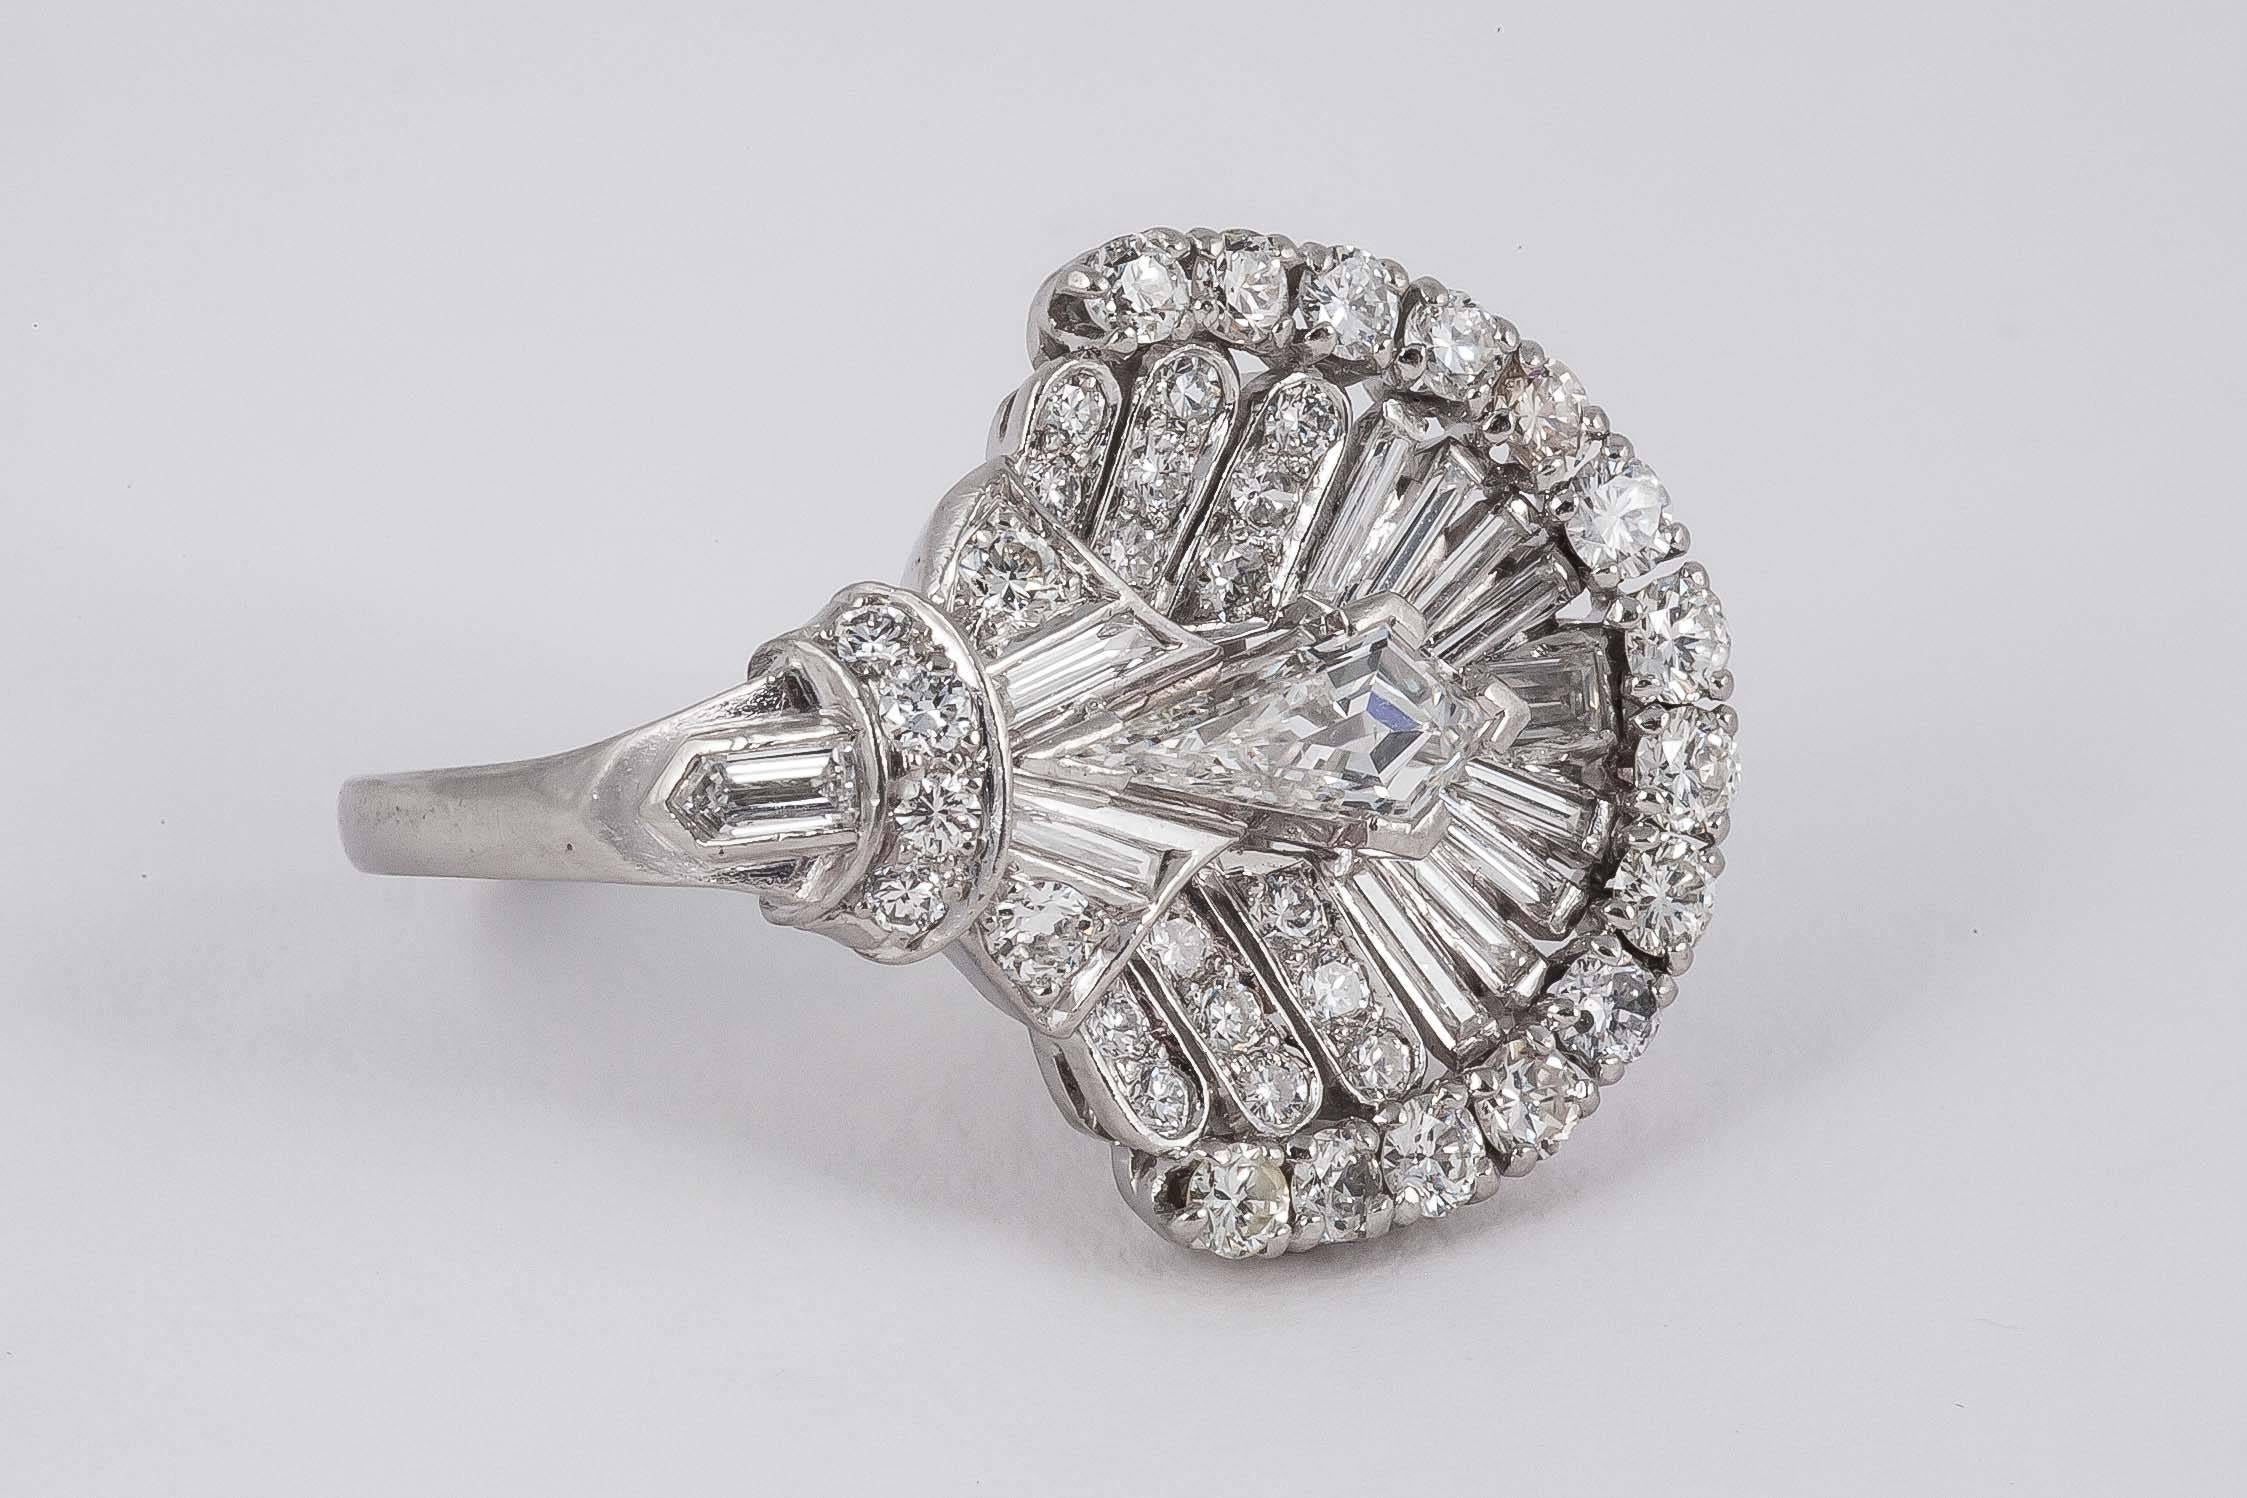  Fan shaped Diamond cocktail ring set with mixed cut diamonds 2.5/3 cts. Set in Platinum

Size L